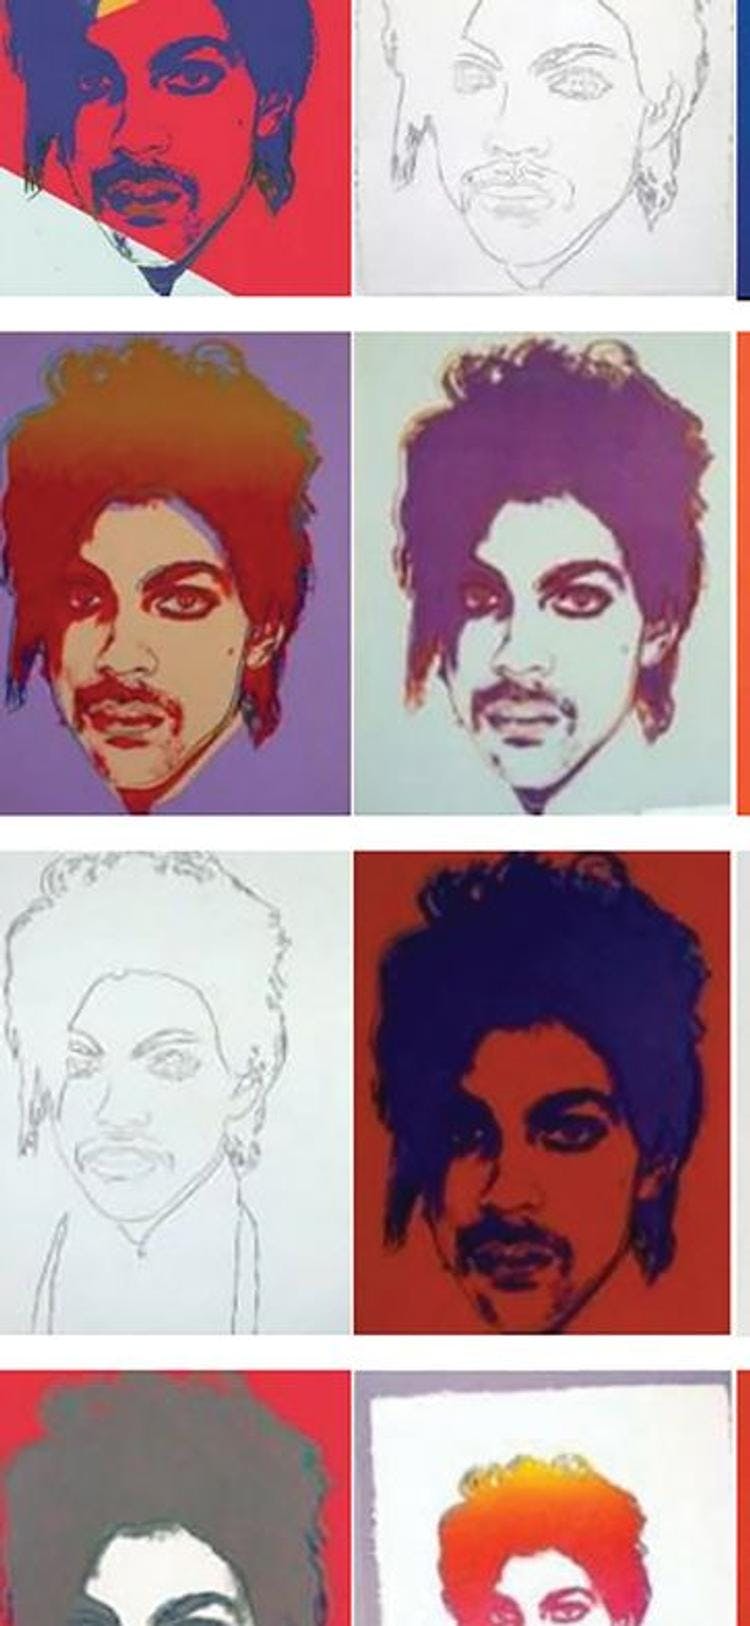 in october 2022, the supreme court heard arguments on whether andy warhol’s silkscreen images of prince violate the copyright of the photographer who took the og picture. the question: does “fair use” protect warhol’s image?